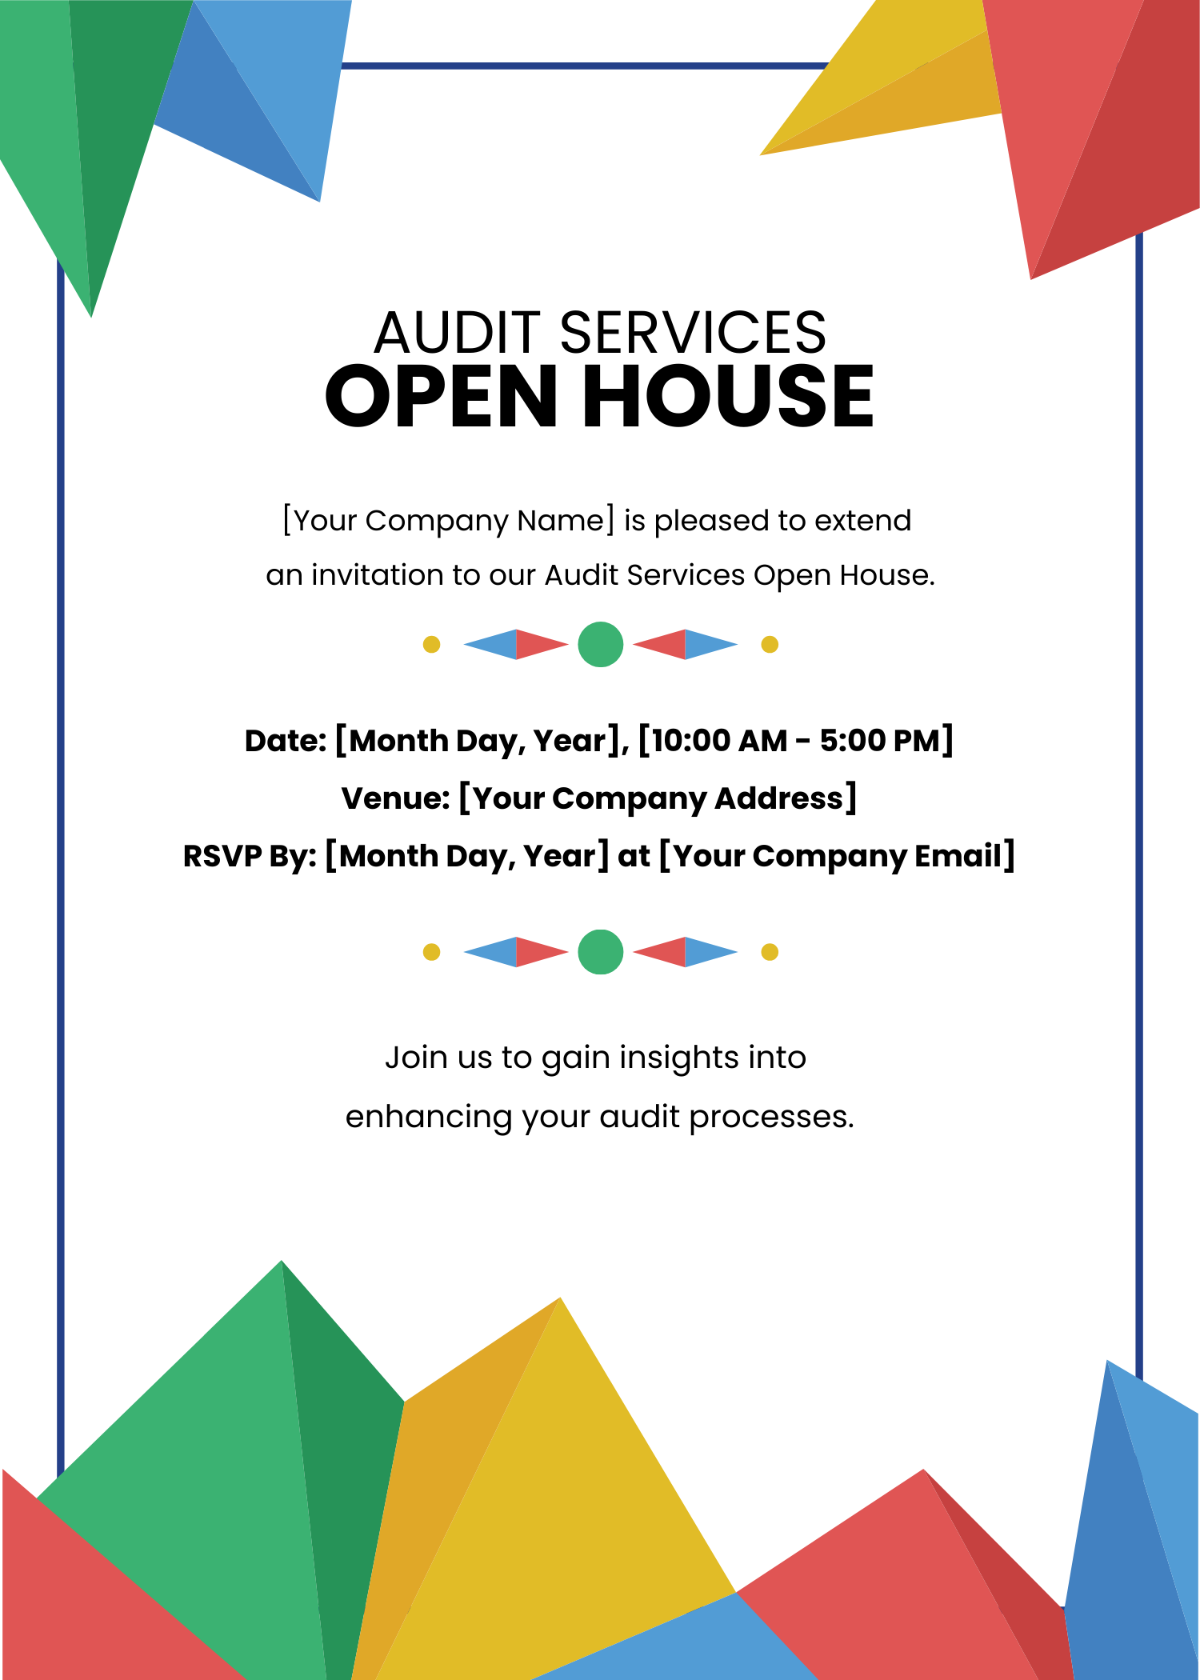 Audit Services Open House Invitation Card Template